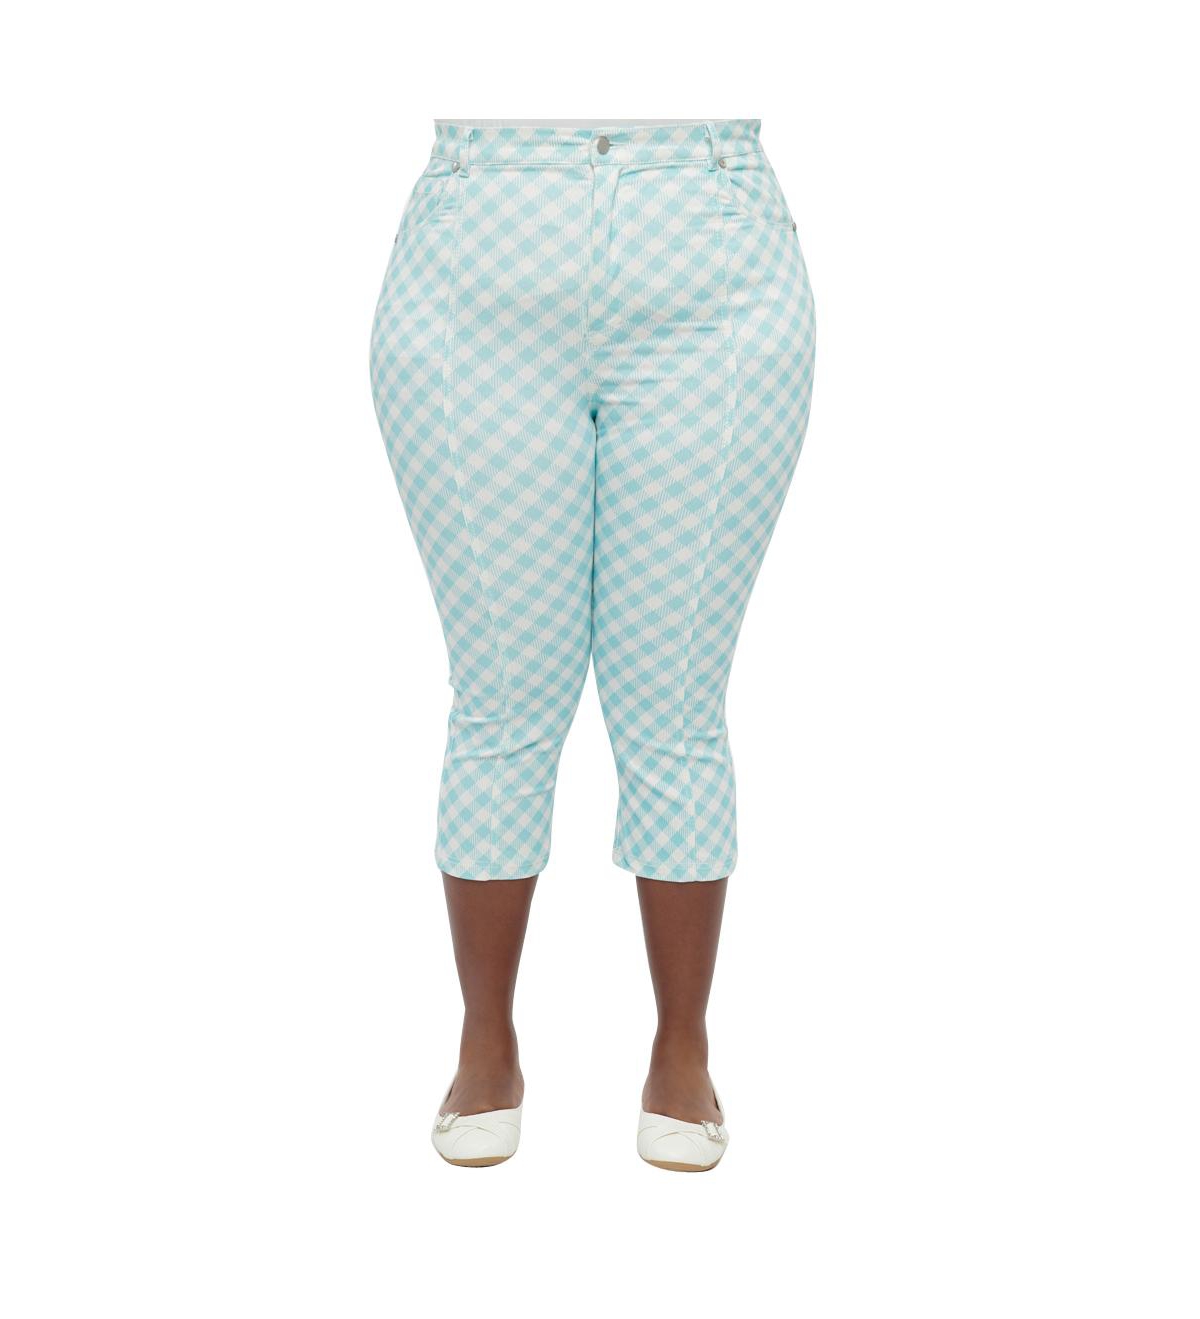 Plus Size Fitted Capri Pants - Blue gingham